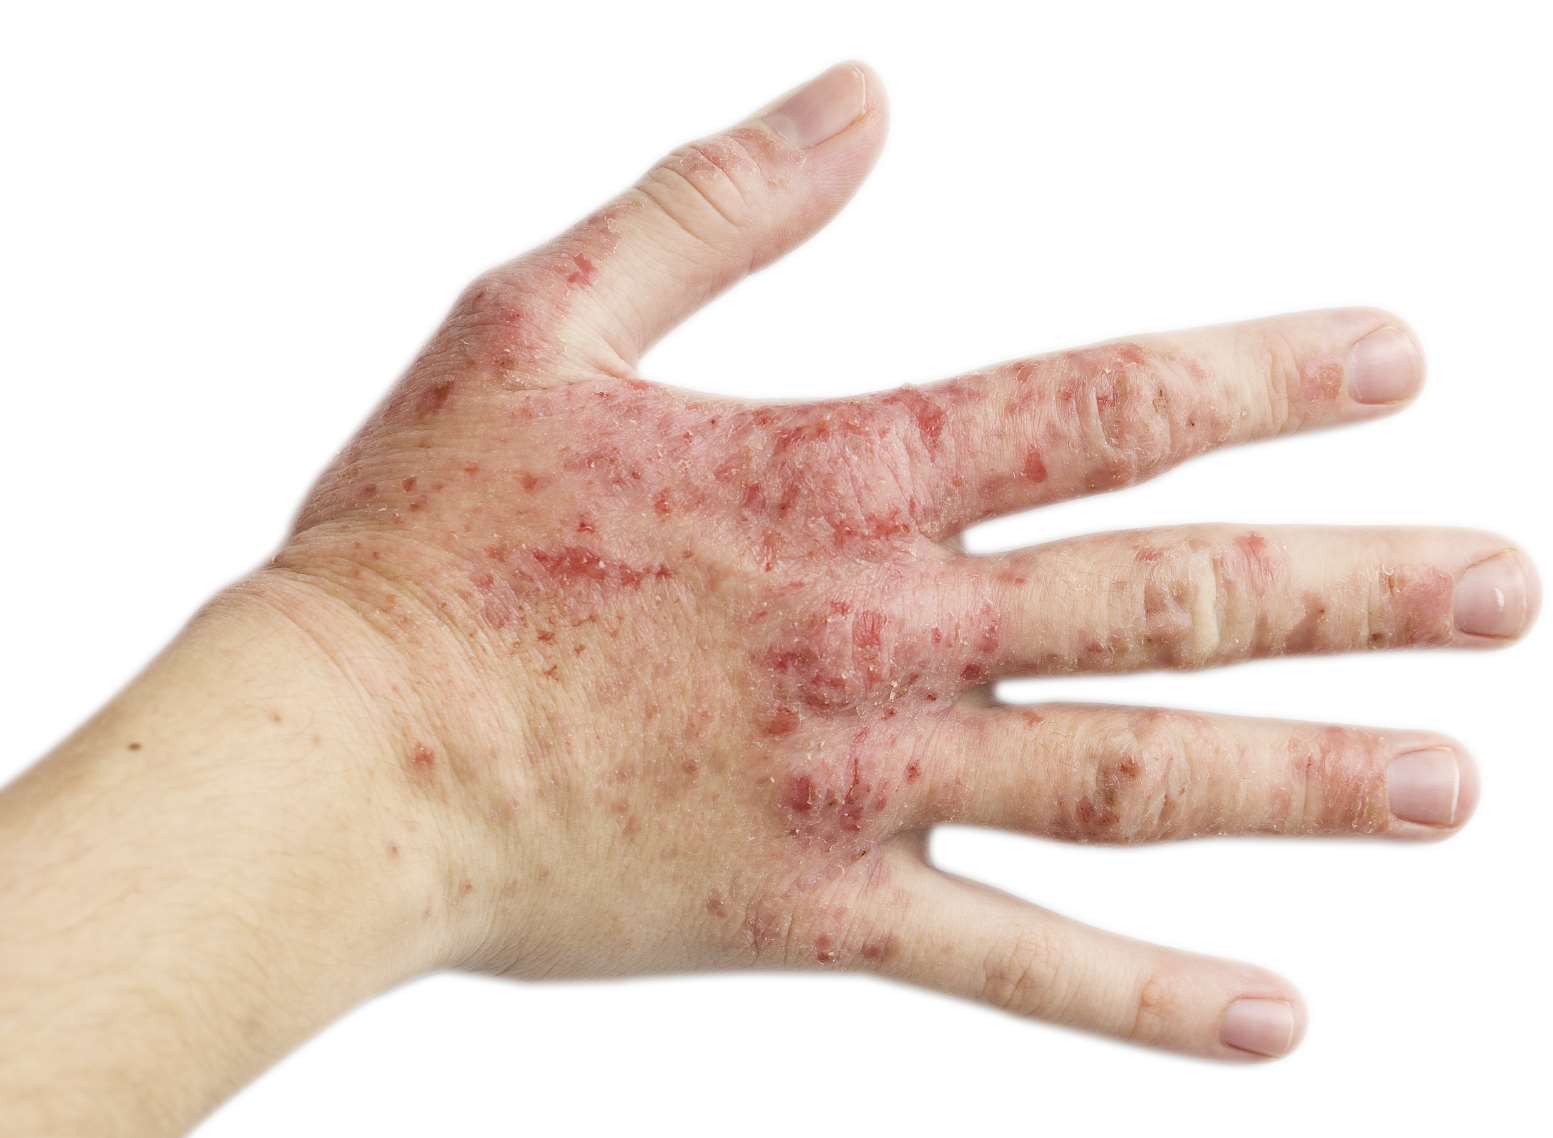 A patient with psoriasis